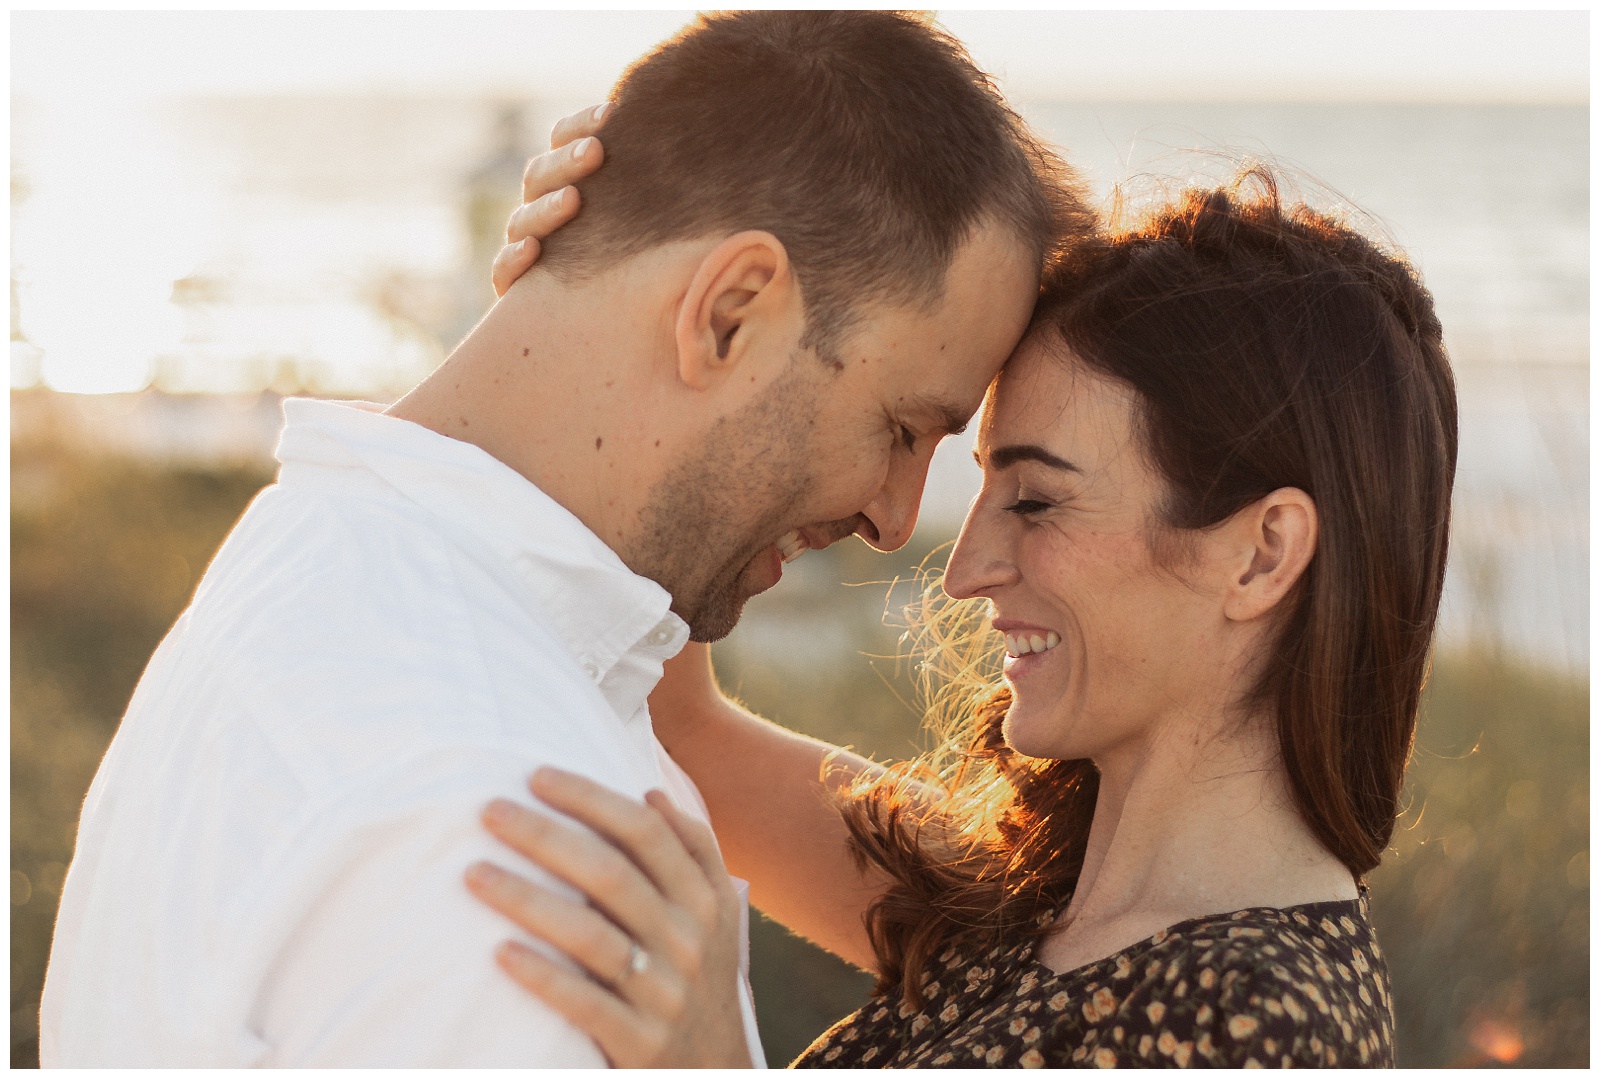 Clearwater Engagement Photographer | Clearwater Beach | Dan + Allie | Clearwater, FL